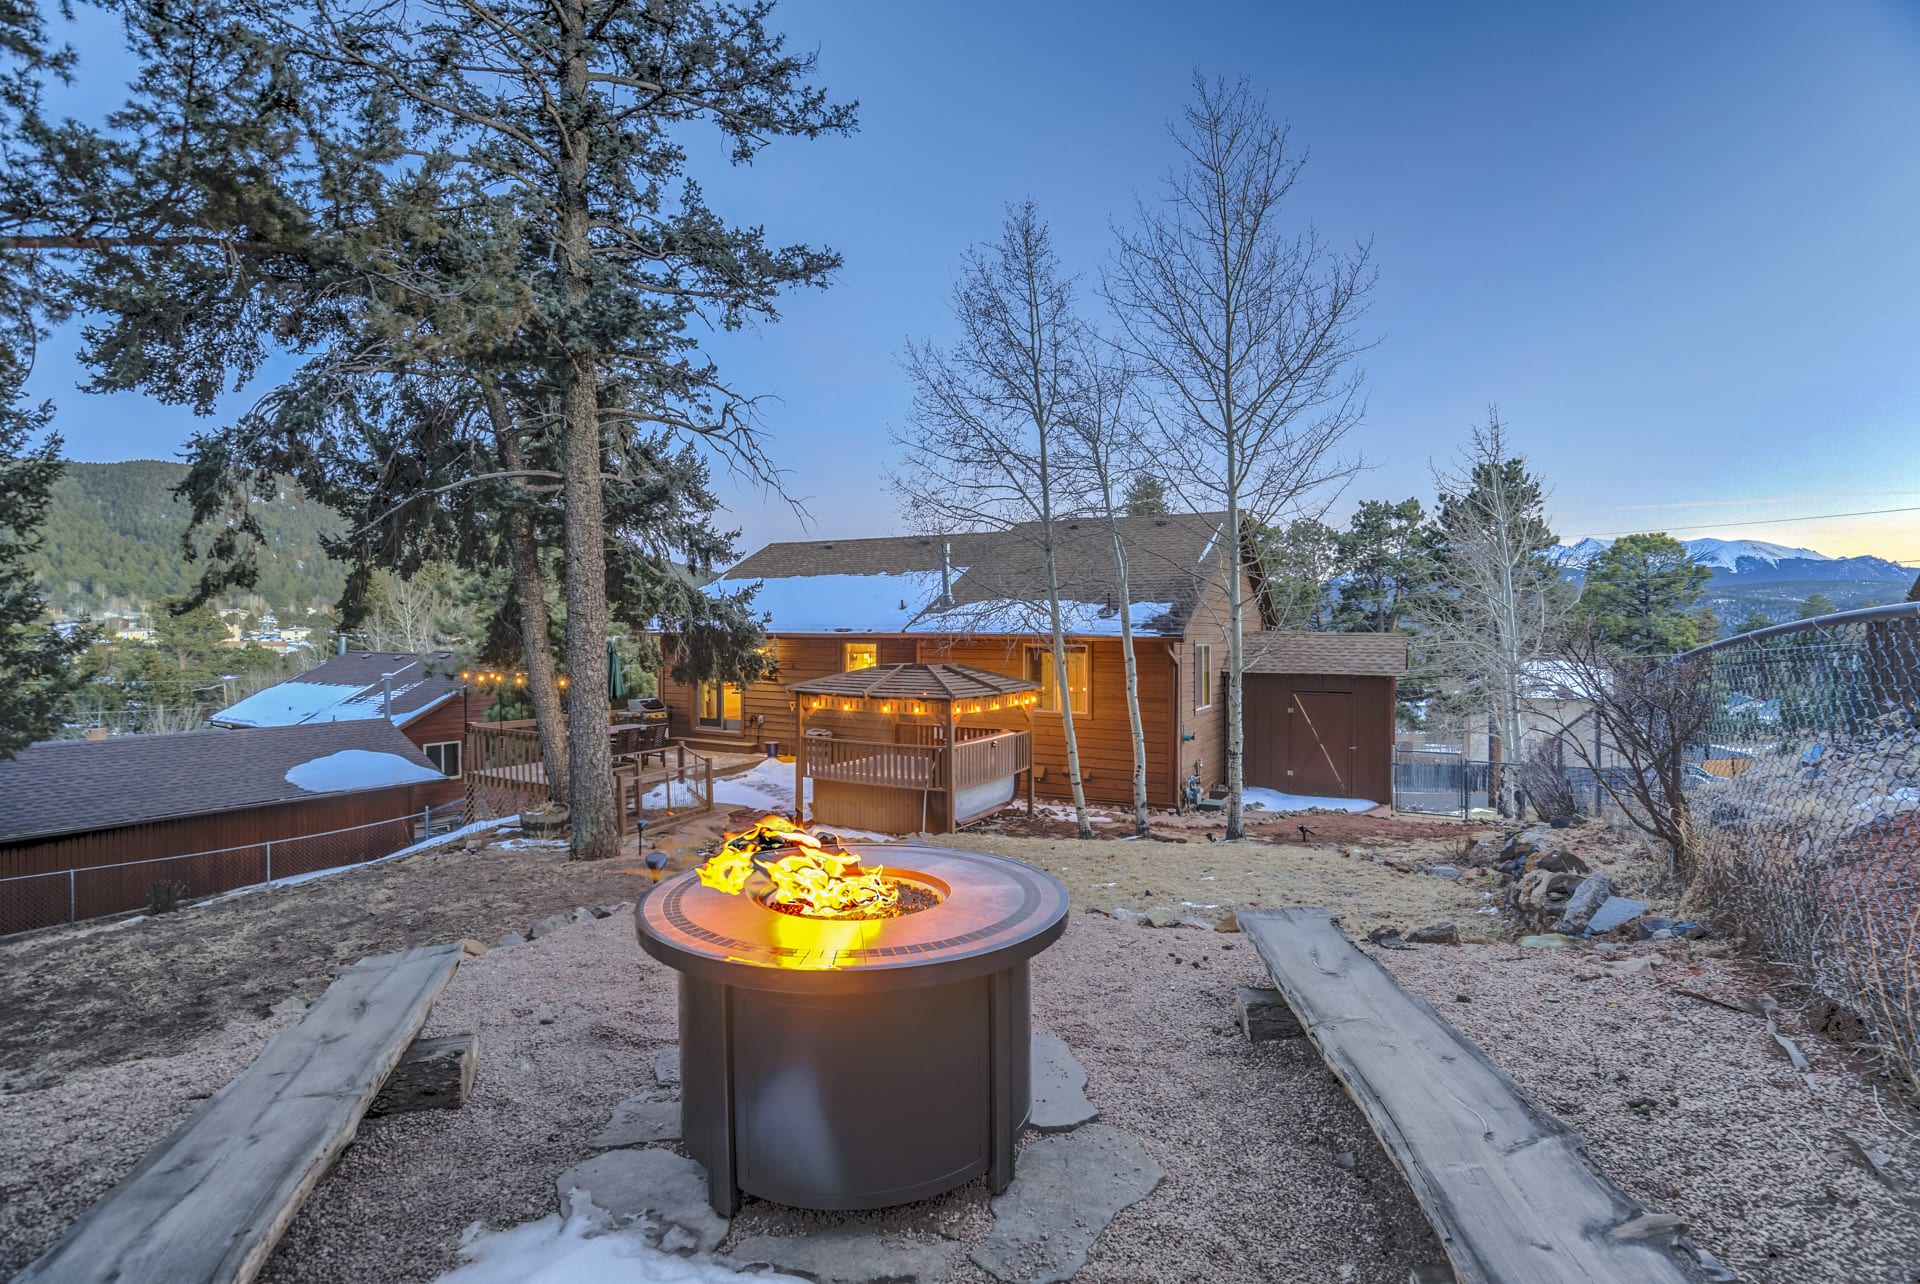 Property Image 2 - 4BR | Hot Tub Experience Colorado the Right Way | Mountain Views